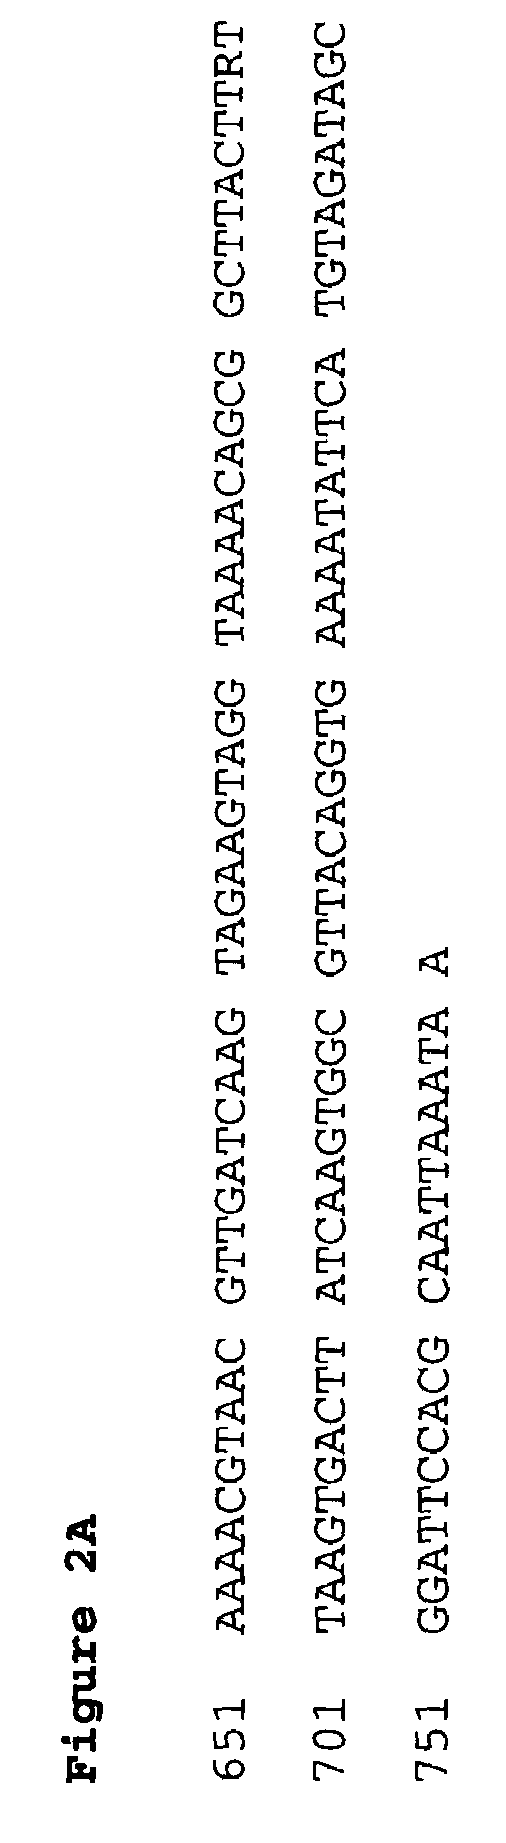 Polynucleotide encoding the enoyl-acyl carrier protein reductase of <i>Staphylococcus aureus</i>, FAB I